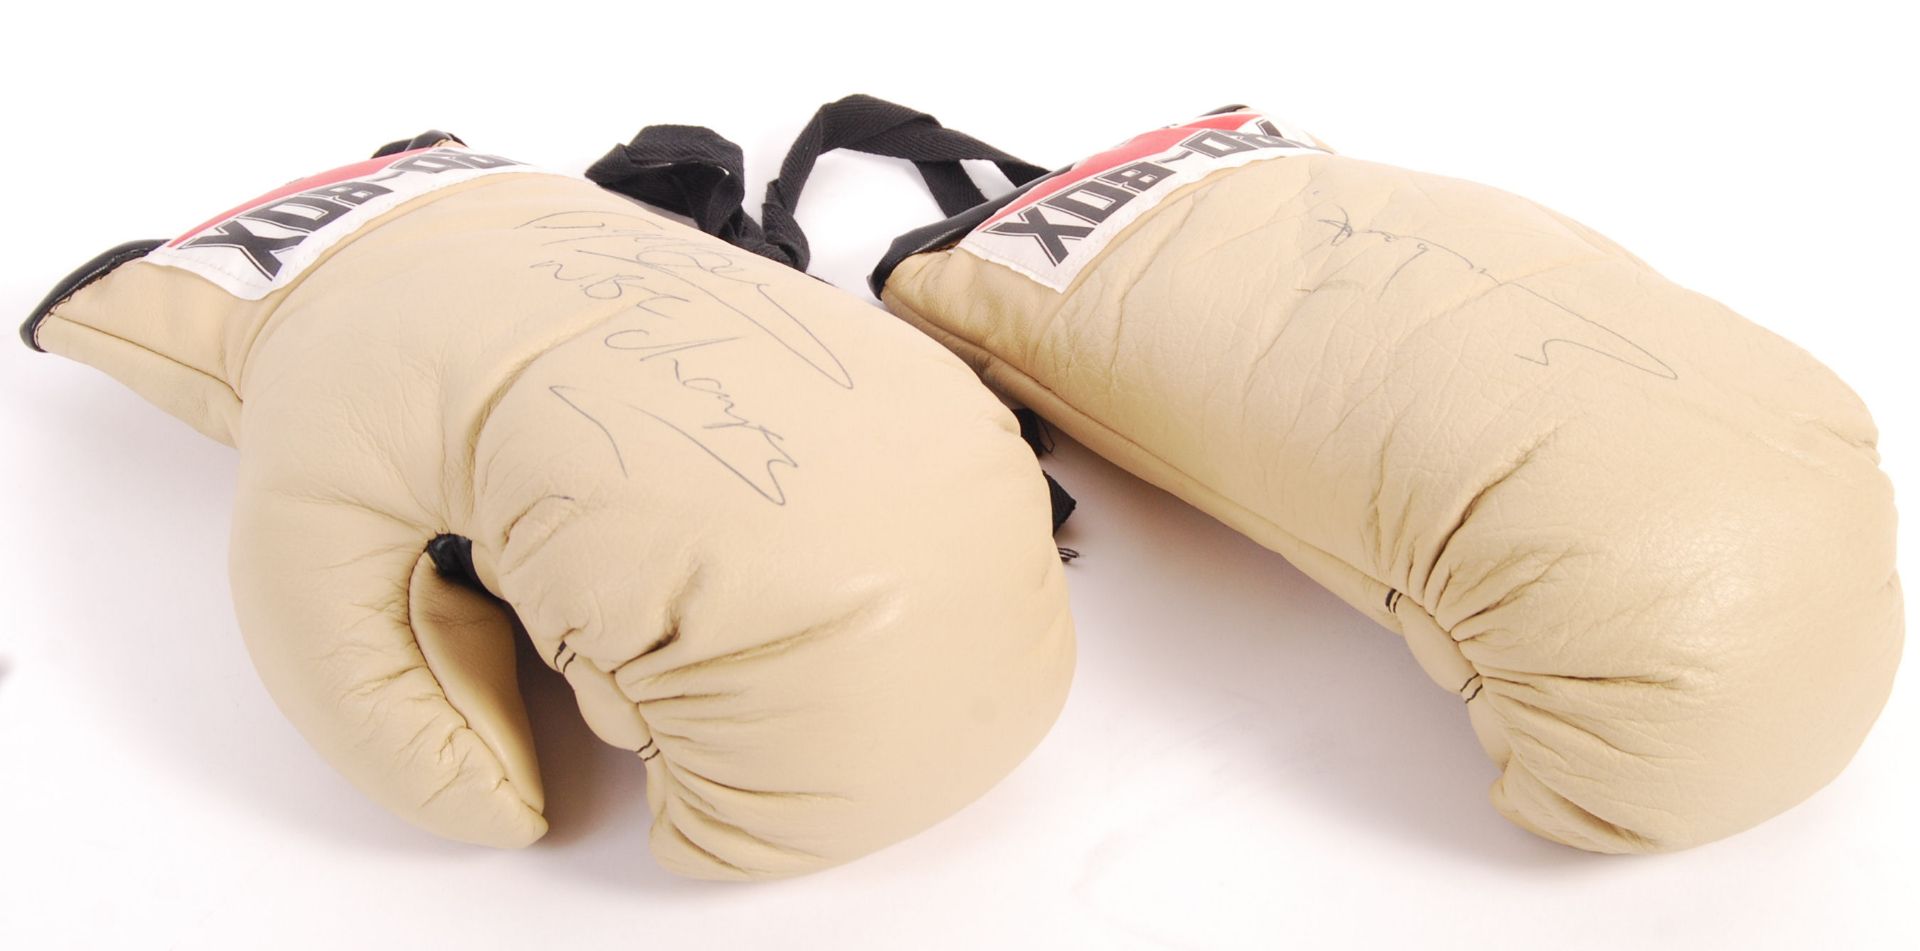 BOXING GLOVES SIGNED BY CHRIS EUBANK AND NIGEL BENN